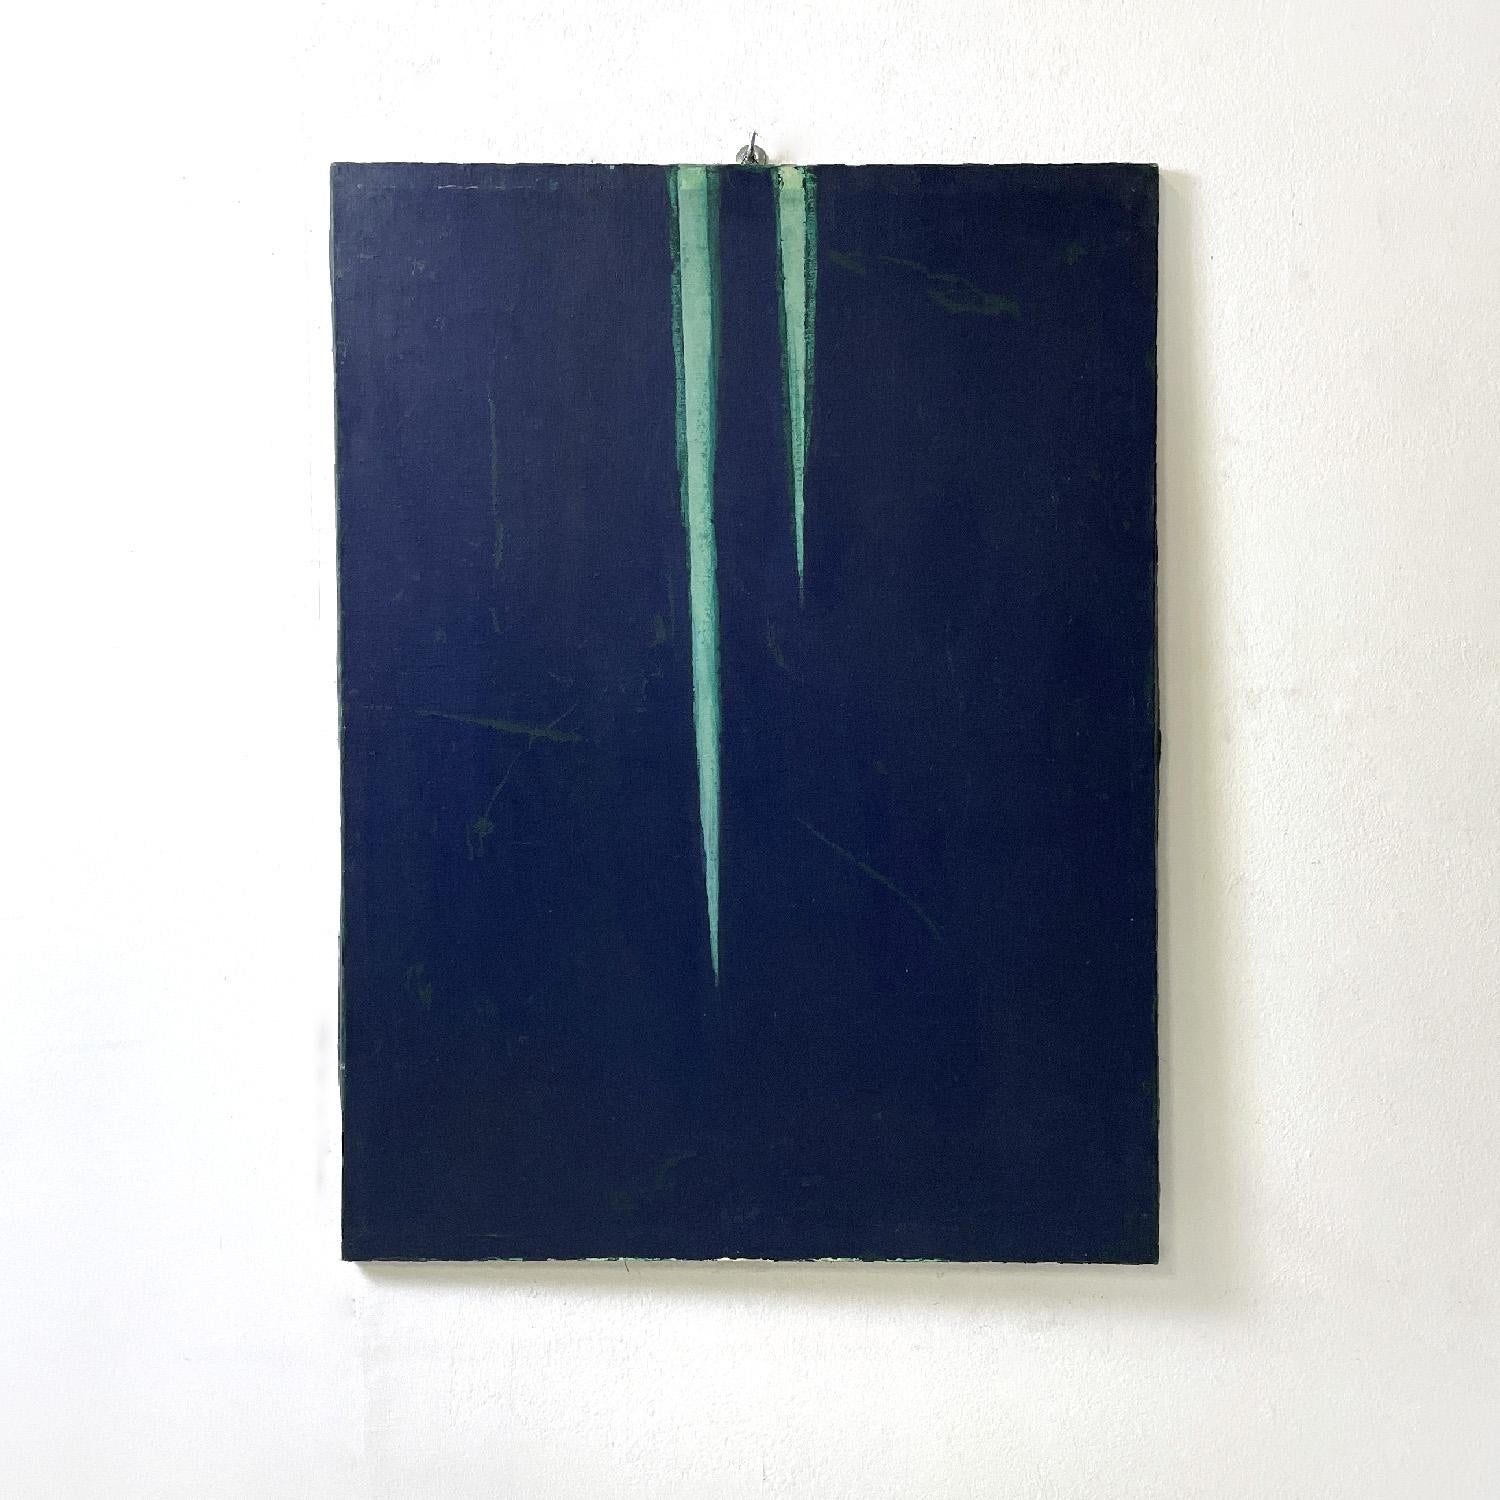 Italian modern blue and green acrylic painting by Domenico Messana, 1972
Rectangular acrylic painting. The background is an intense and deep blue. In the upper central part there are two pointed vertical elements, one extends beyond the center of